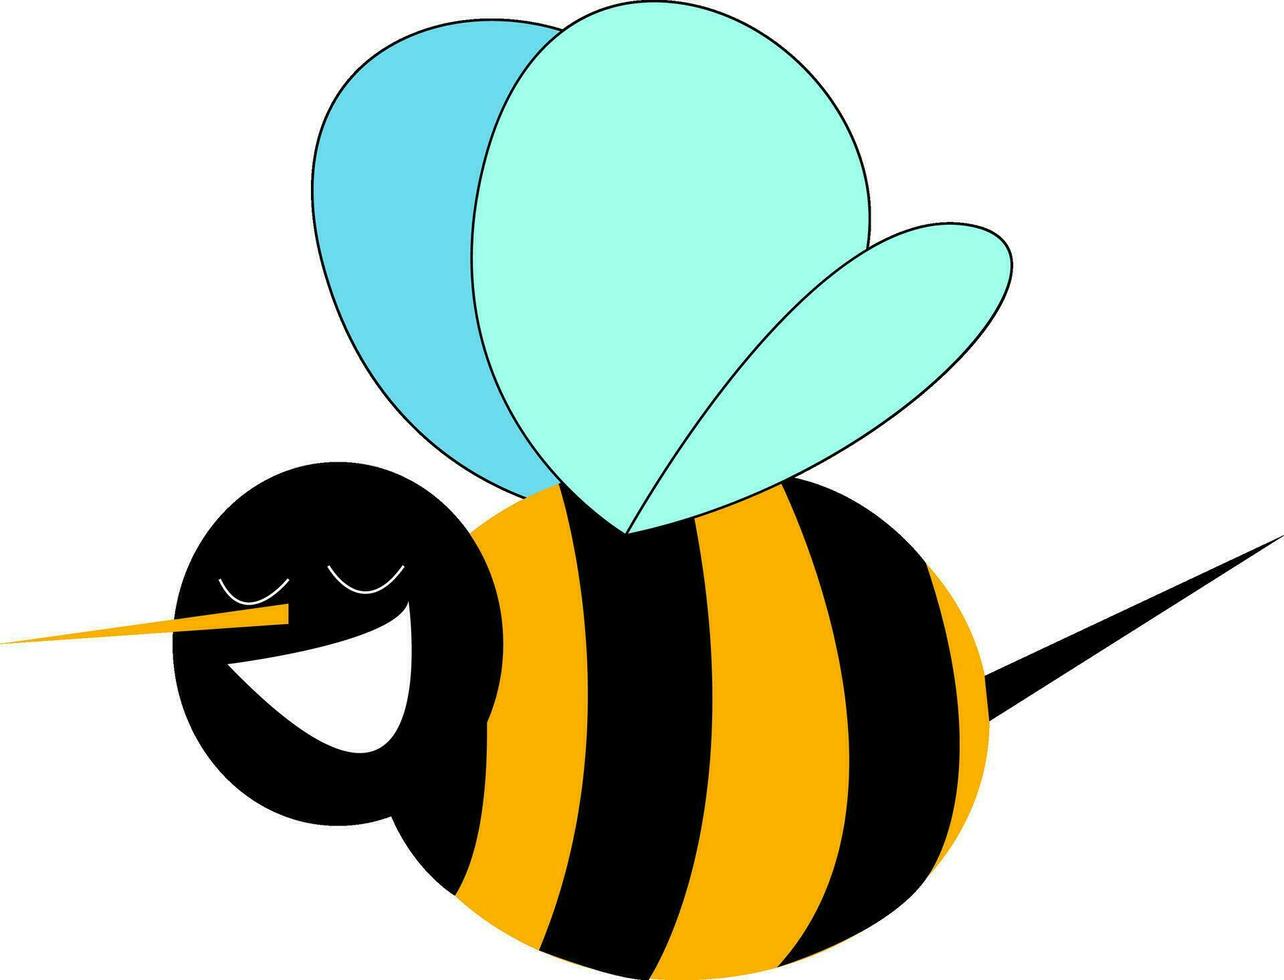 Smiling bumble bee  print  vector on white background